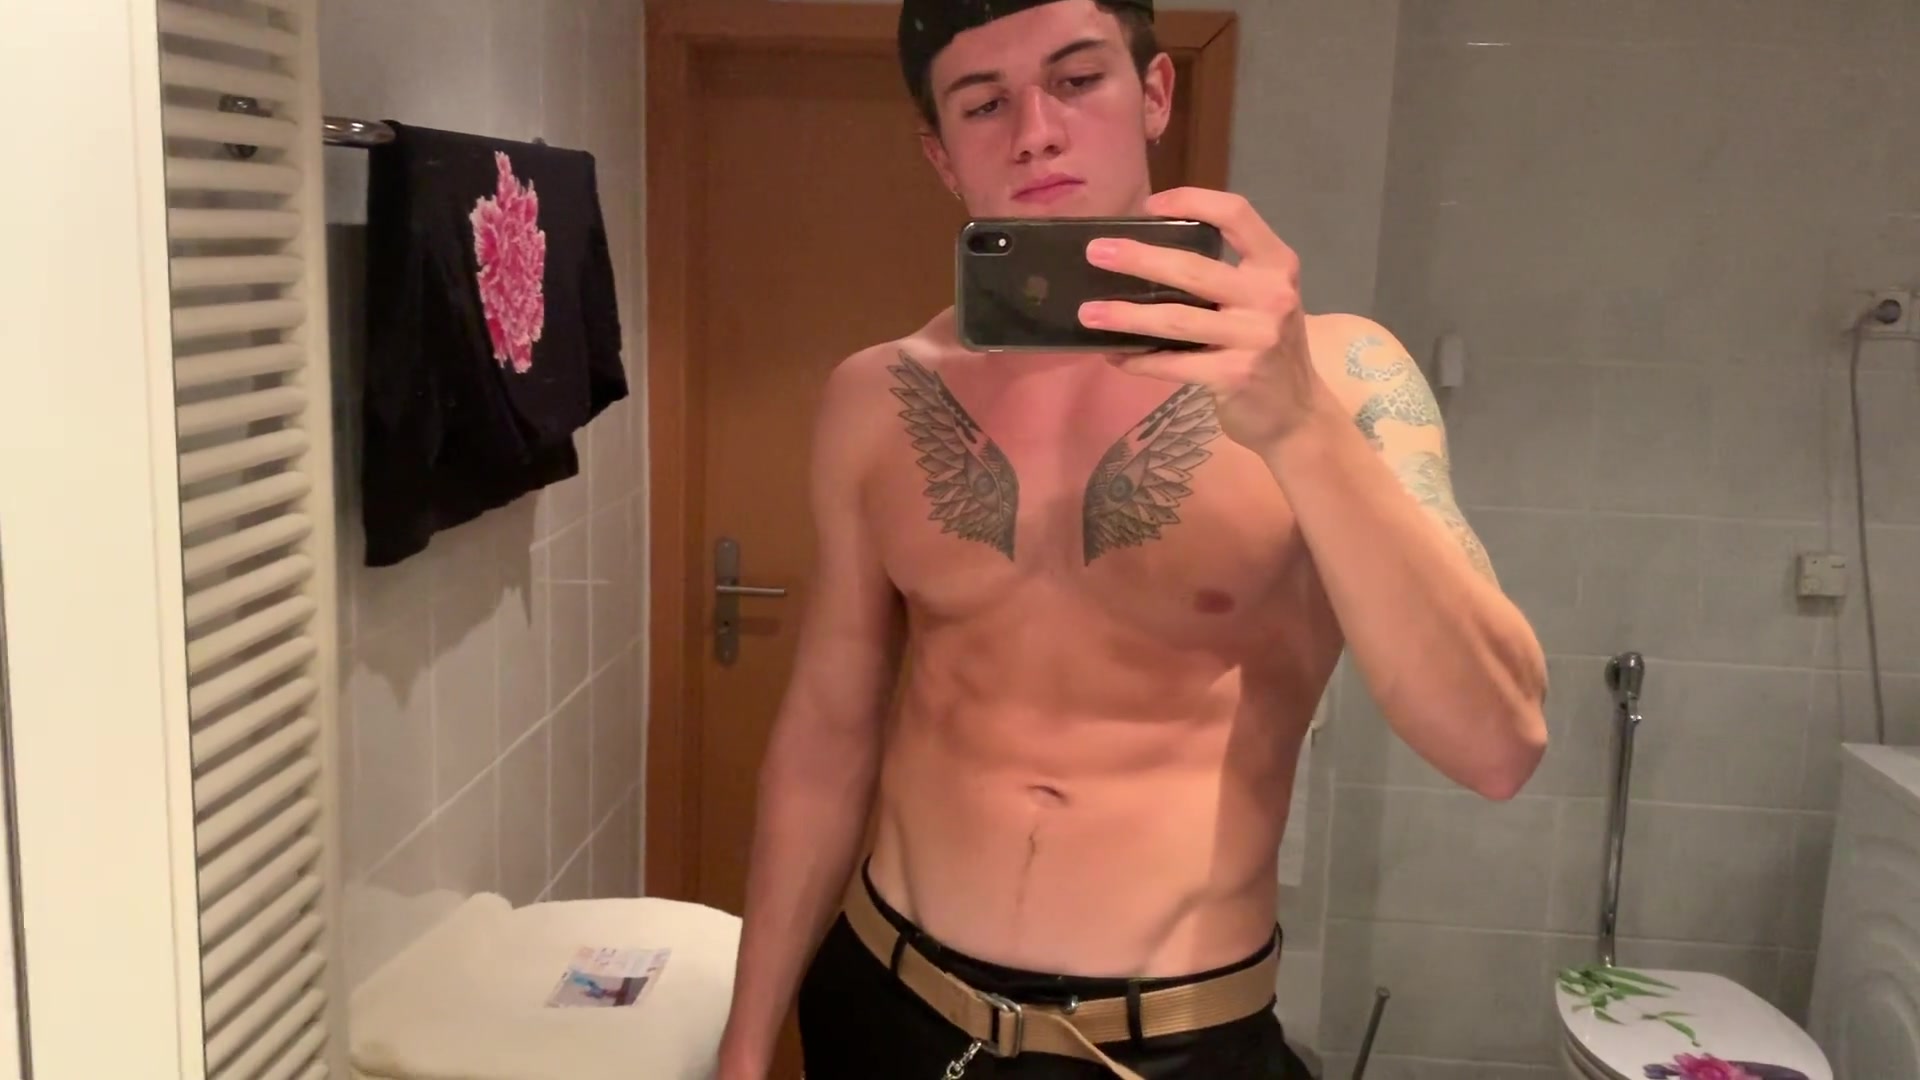 PERFECT BOY WITH GREAT BODY CUMMING